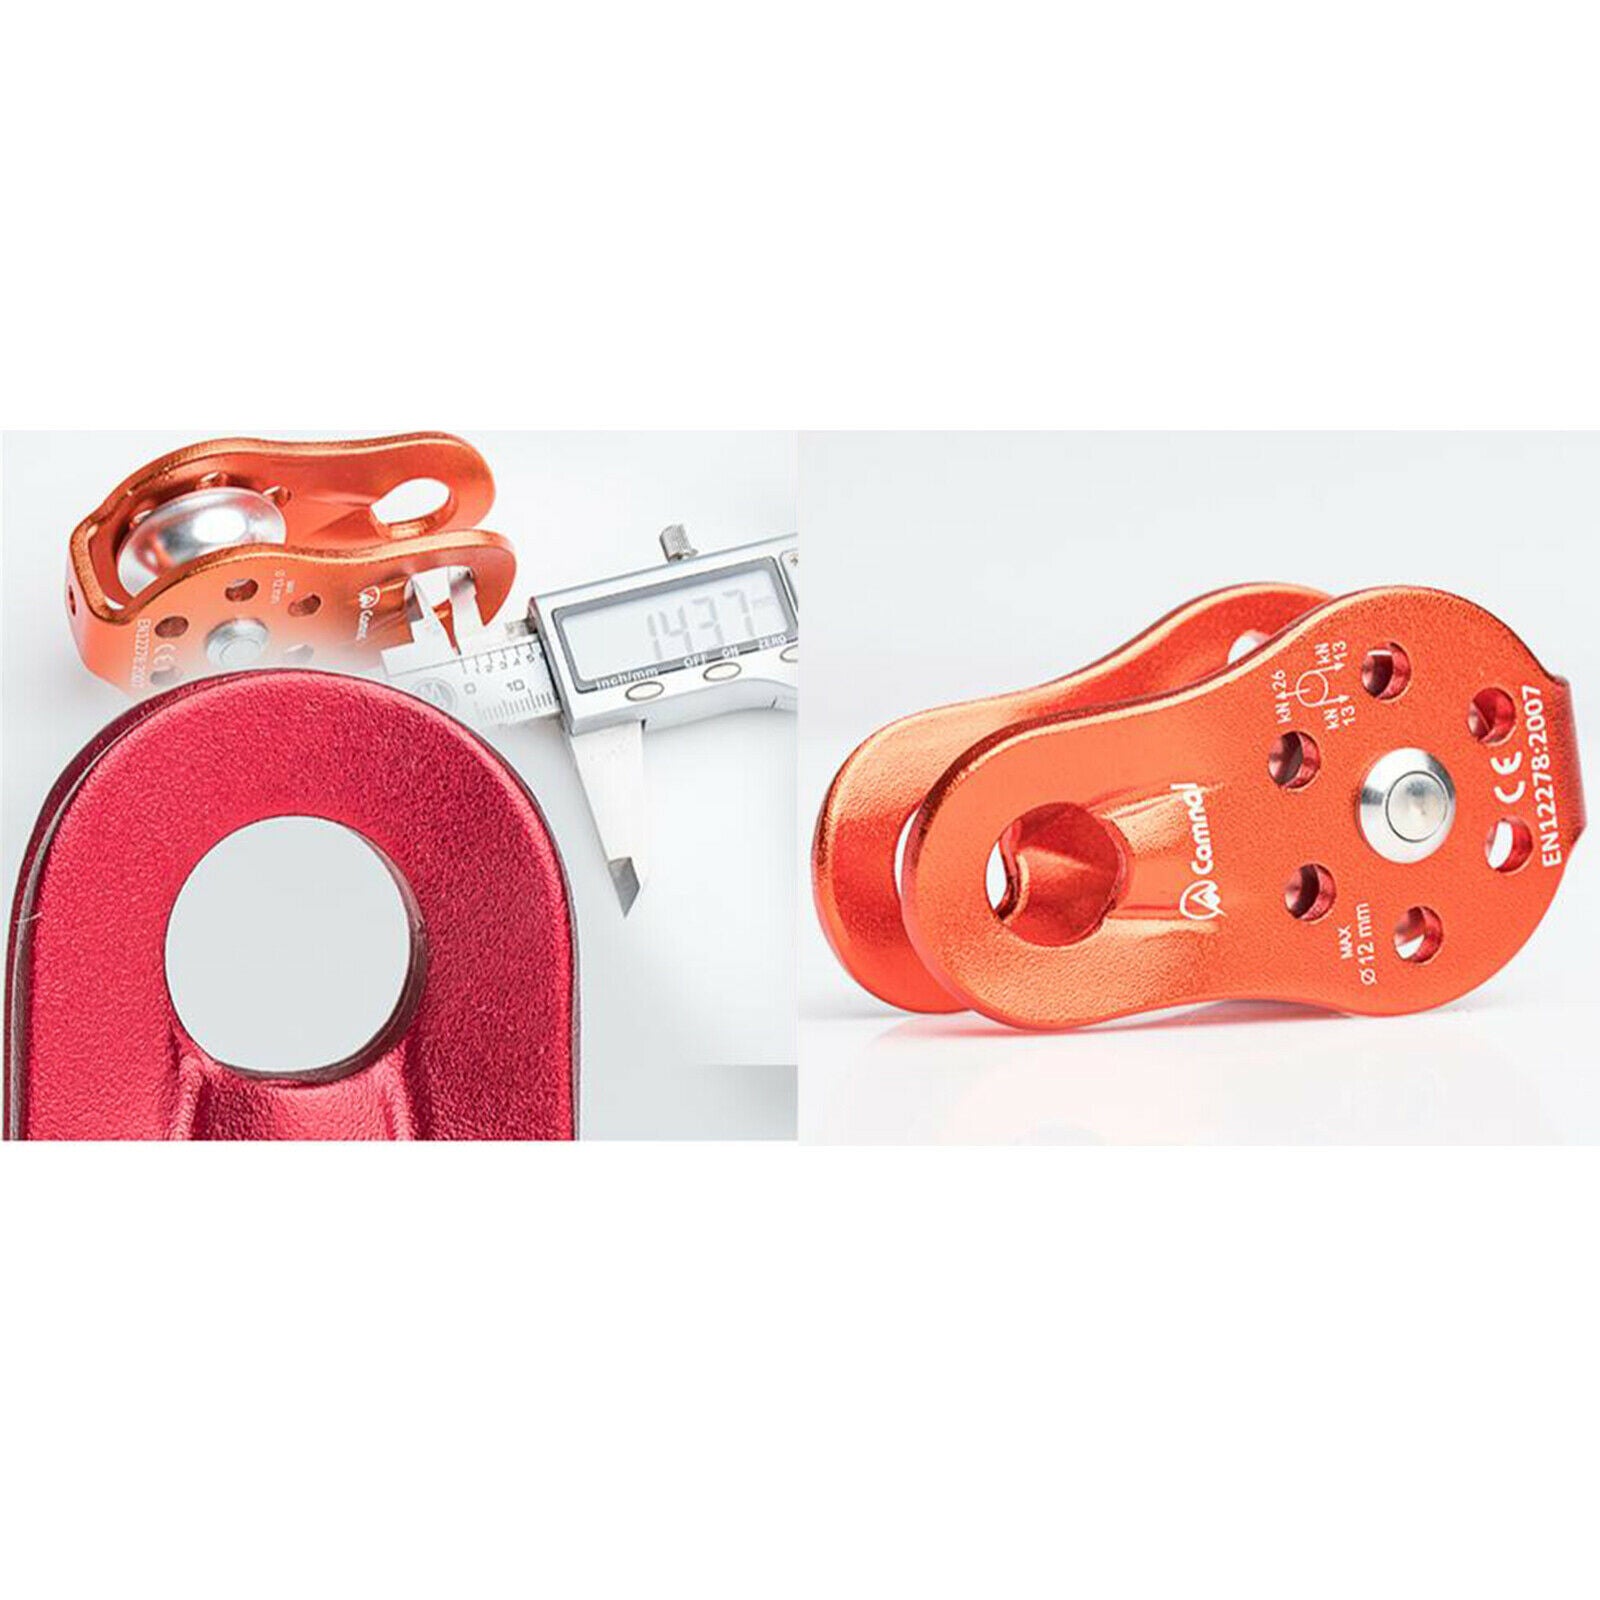 26KN Triple Attachment Pulley / Hitch Climbing Arborist for 12mm Rope Orange